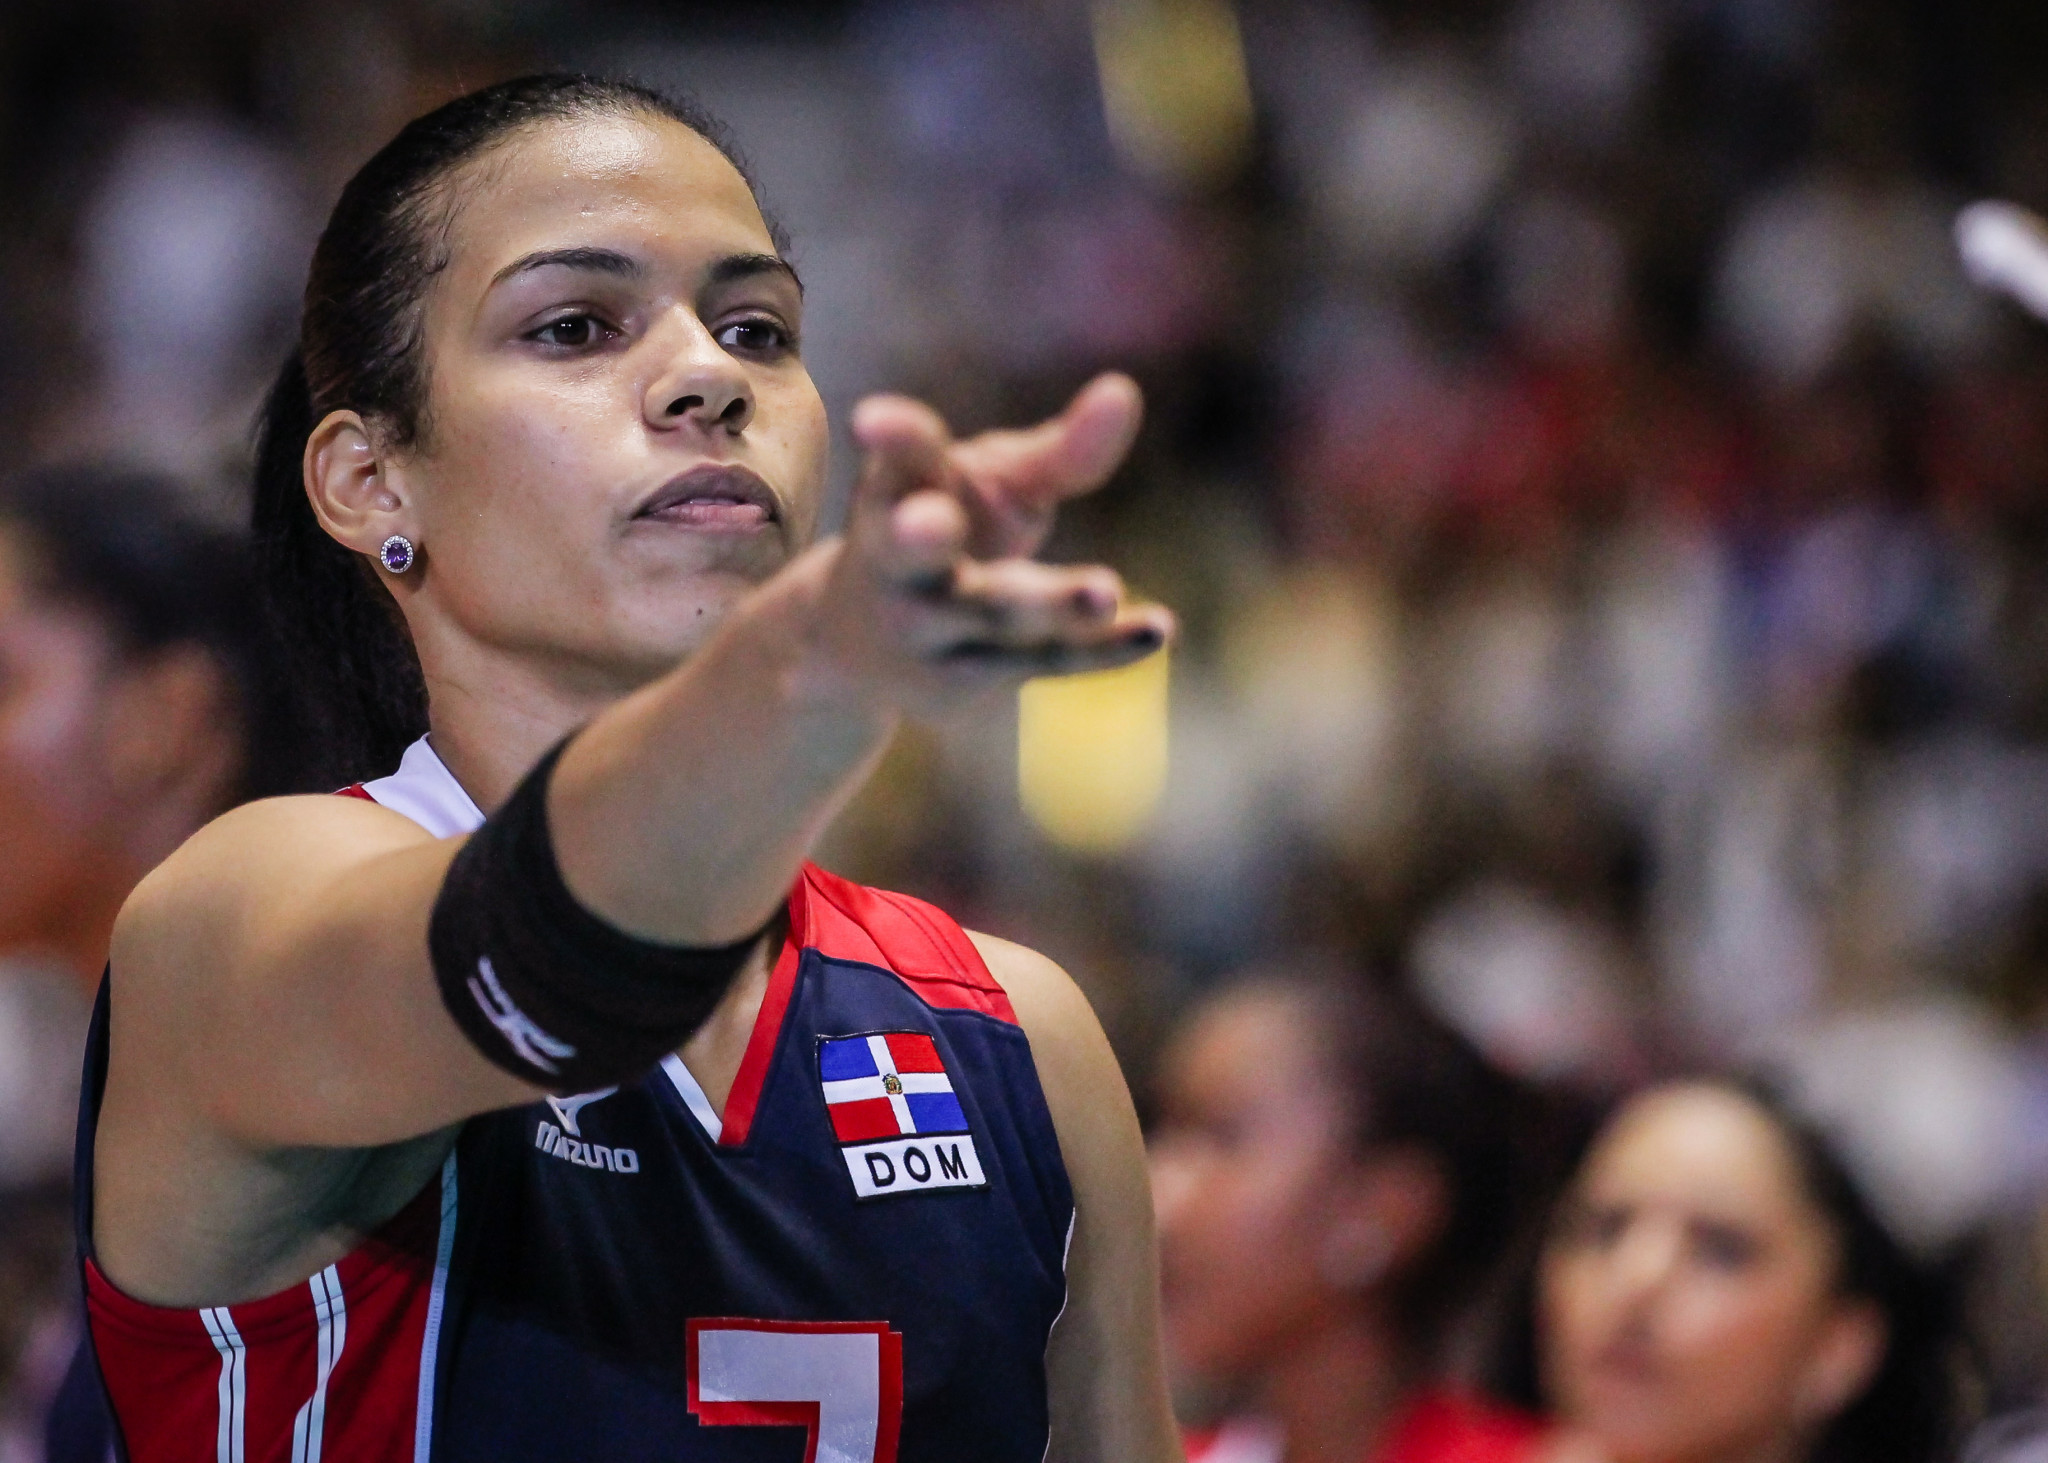 Niverka Marte was awarded with the Most Valuable Player award for her performances at the Volleyball Cup ©Getty Images